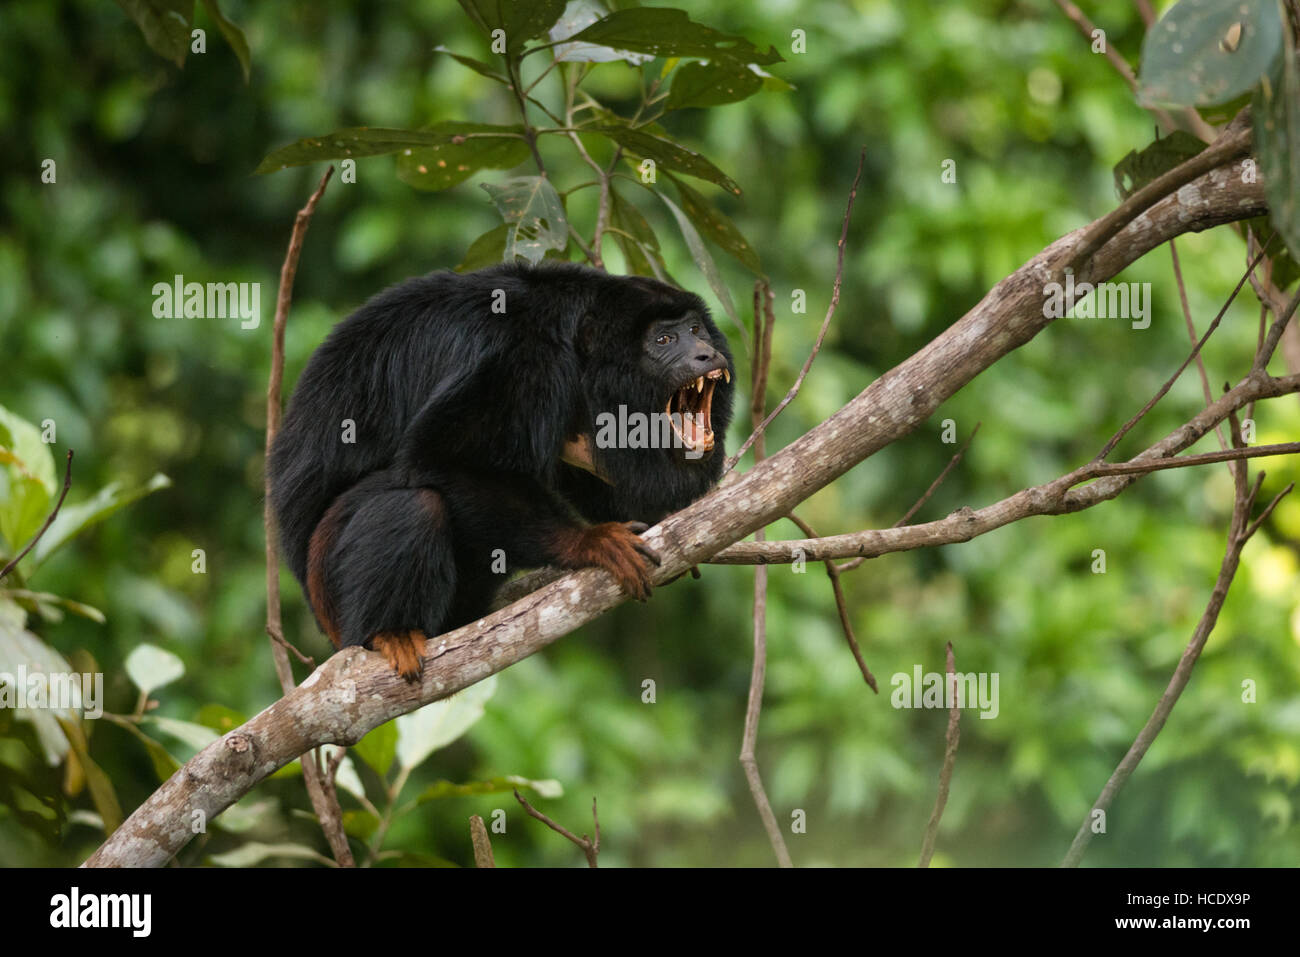 A vulnerable Red-handed Howler Monkey (Alouatta belzebul) from the Amazon Rainforest Stock Photo